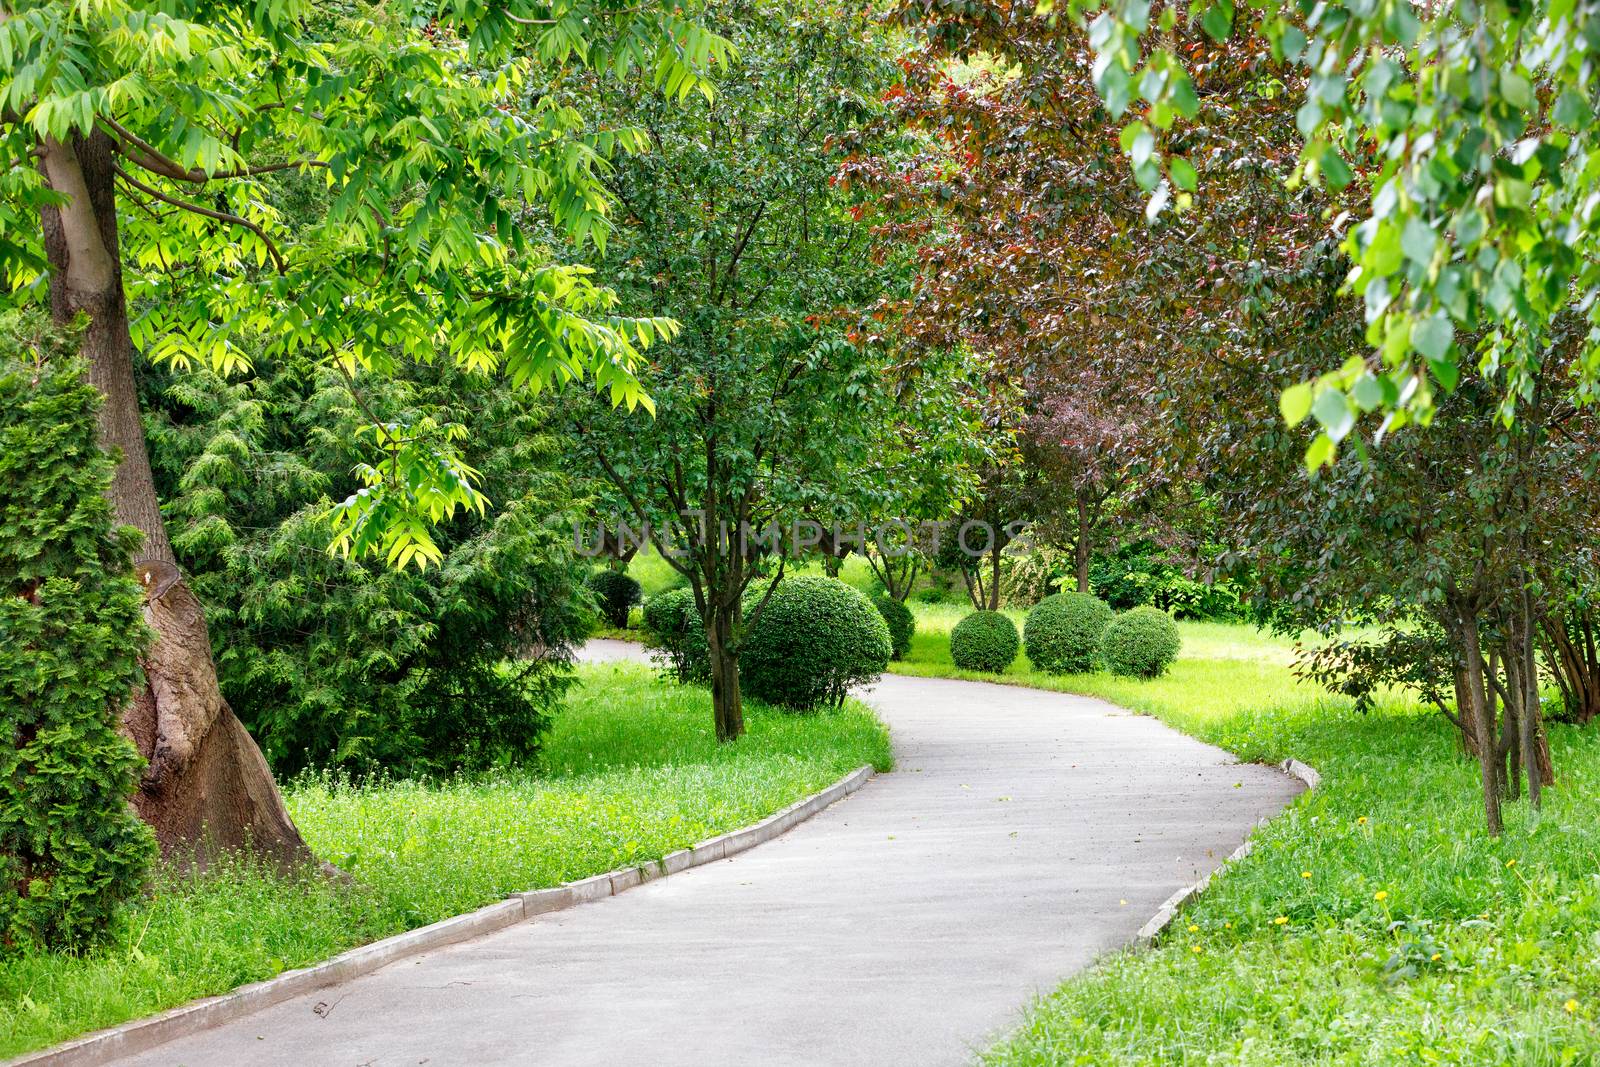 A winding asphalt road for pedestrians goes through a picturesque green summer park with soft sunlight, and on the side of the road there are many beautiful decorative bushes with round shape and trees.